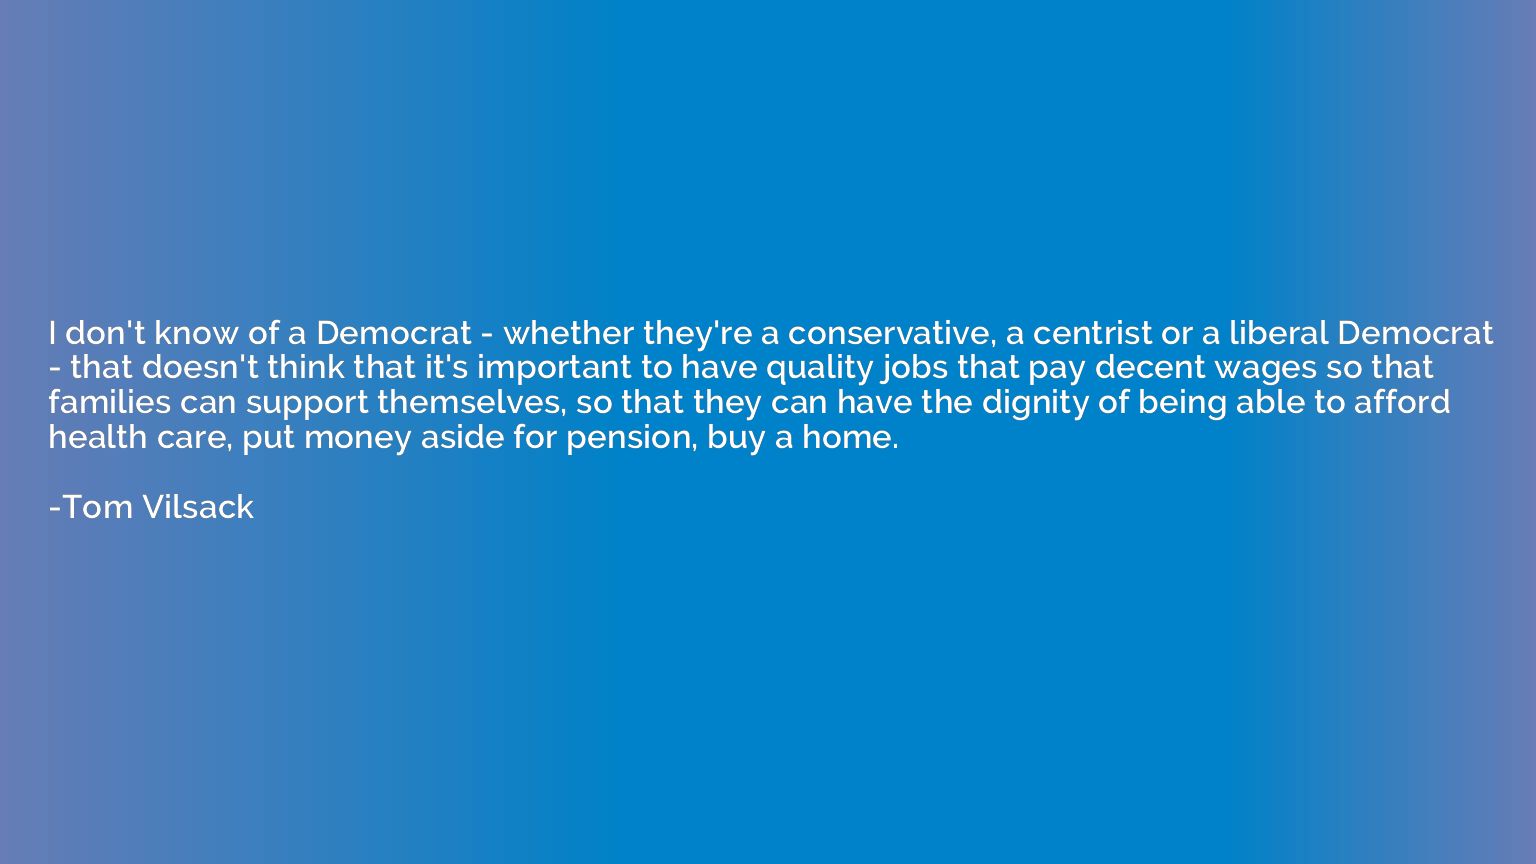 I don't know of a Democrat - whether they're a conservative,